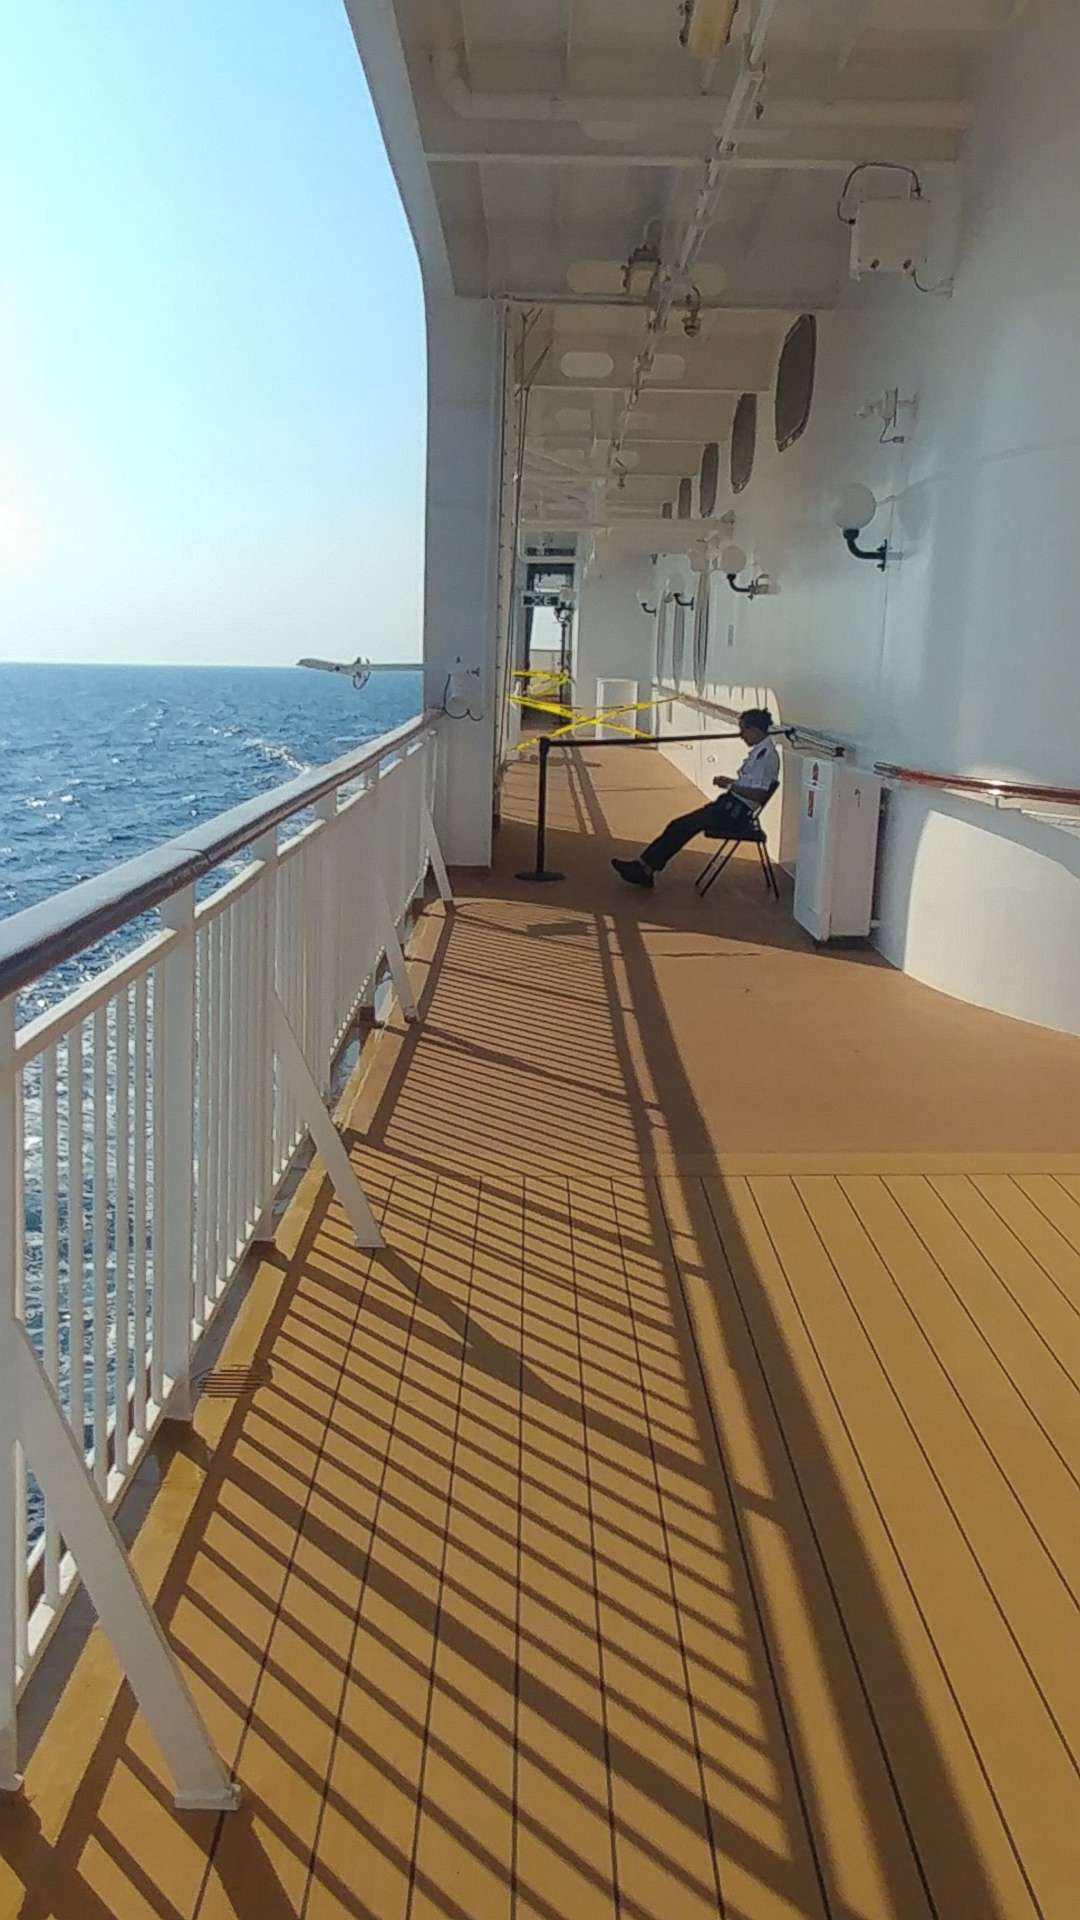 Clay Barclay, a passenger on the Norwegian Star from Alabama, shared a photo of the location where a woman fell off the ship on Sunday, Aug. 19, 2018.